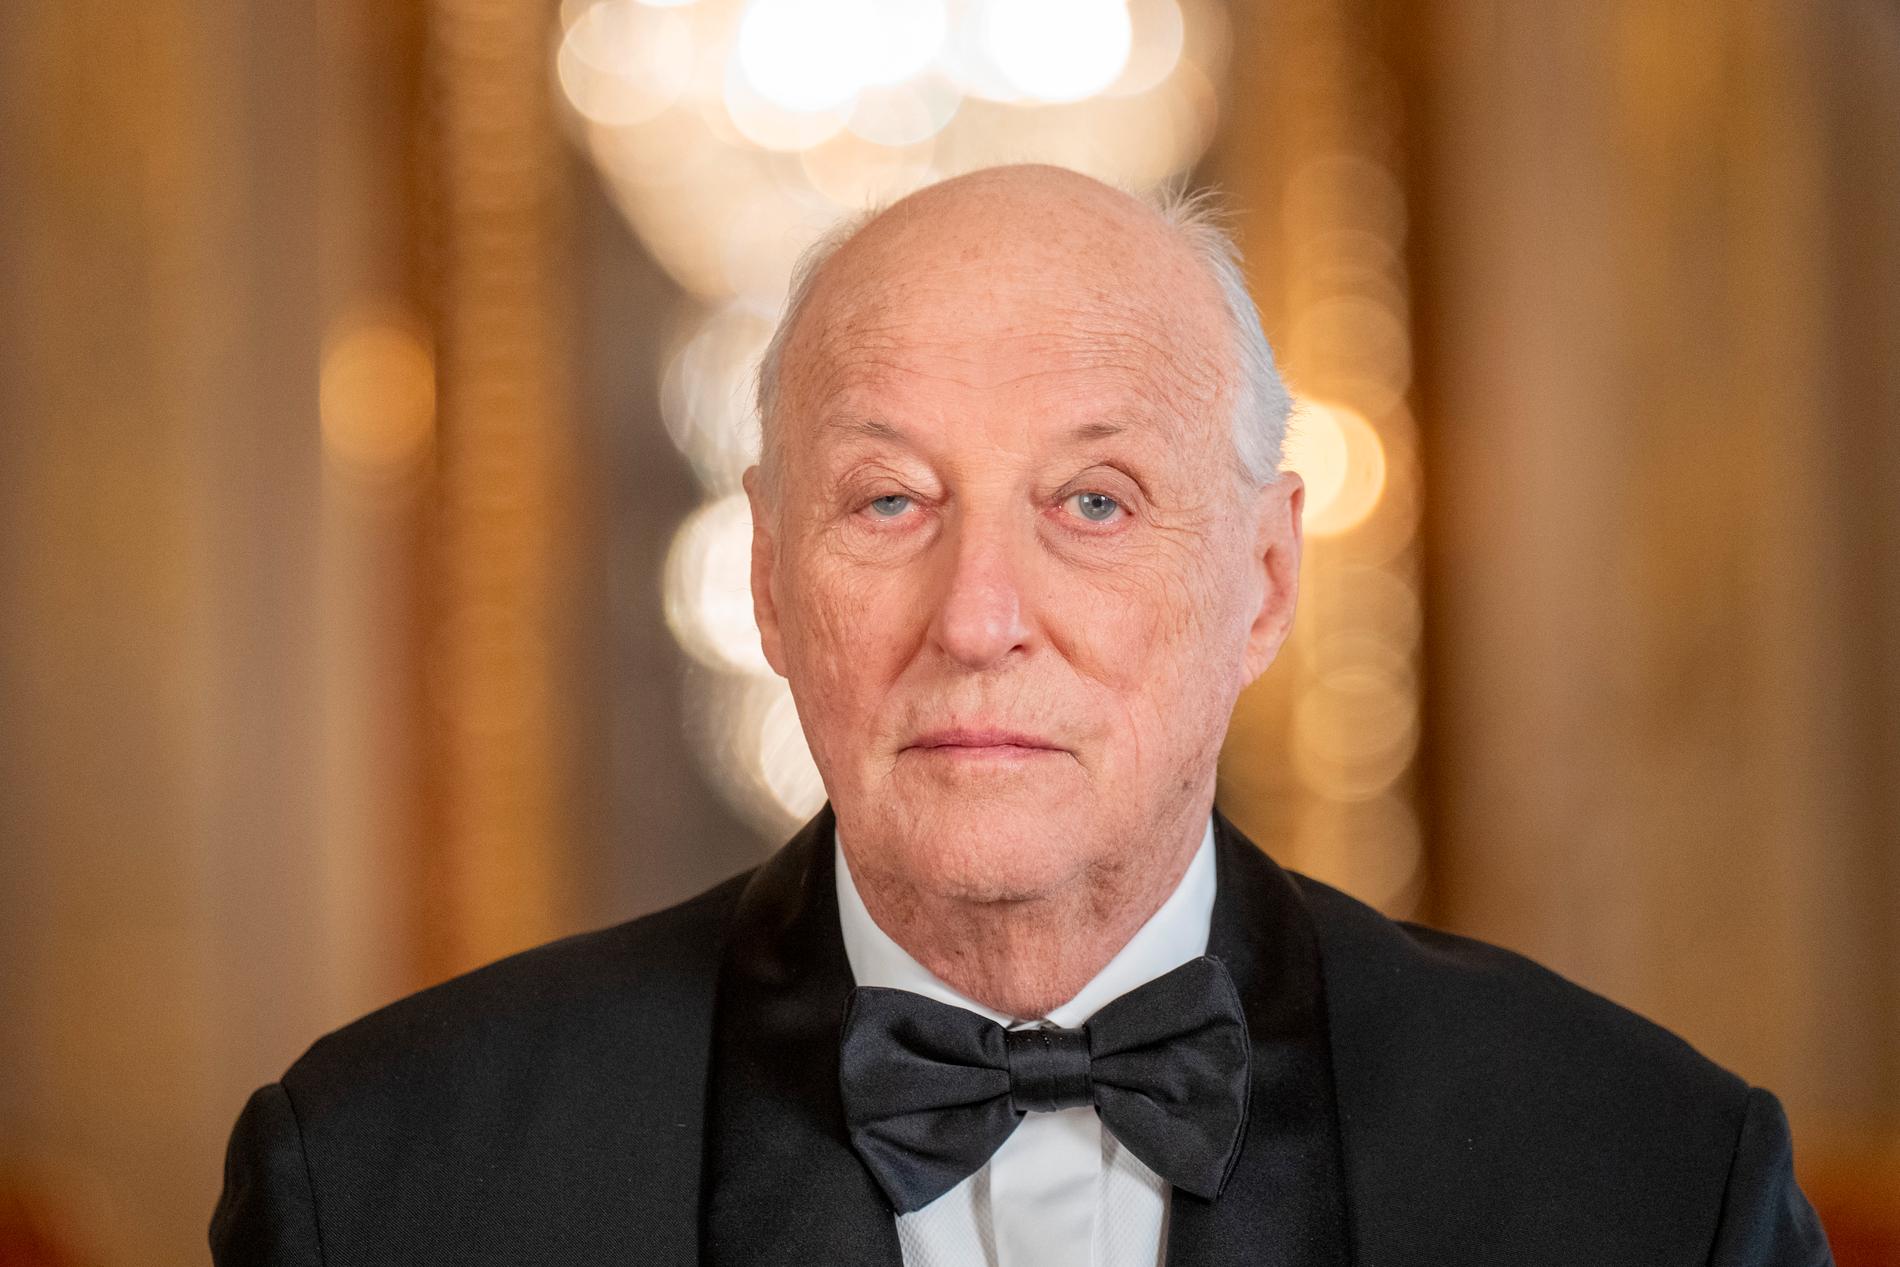 Survey Shows Majority of People Want King Harald to Remain in Office Until His Death